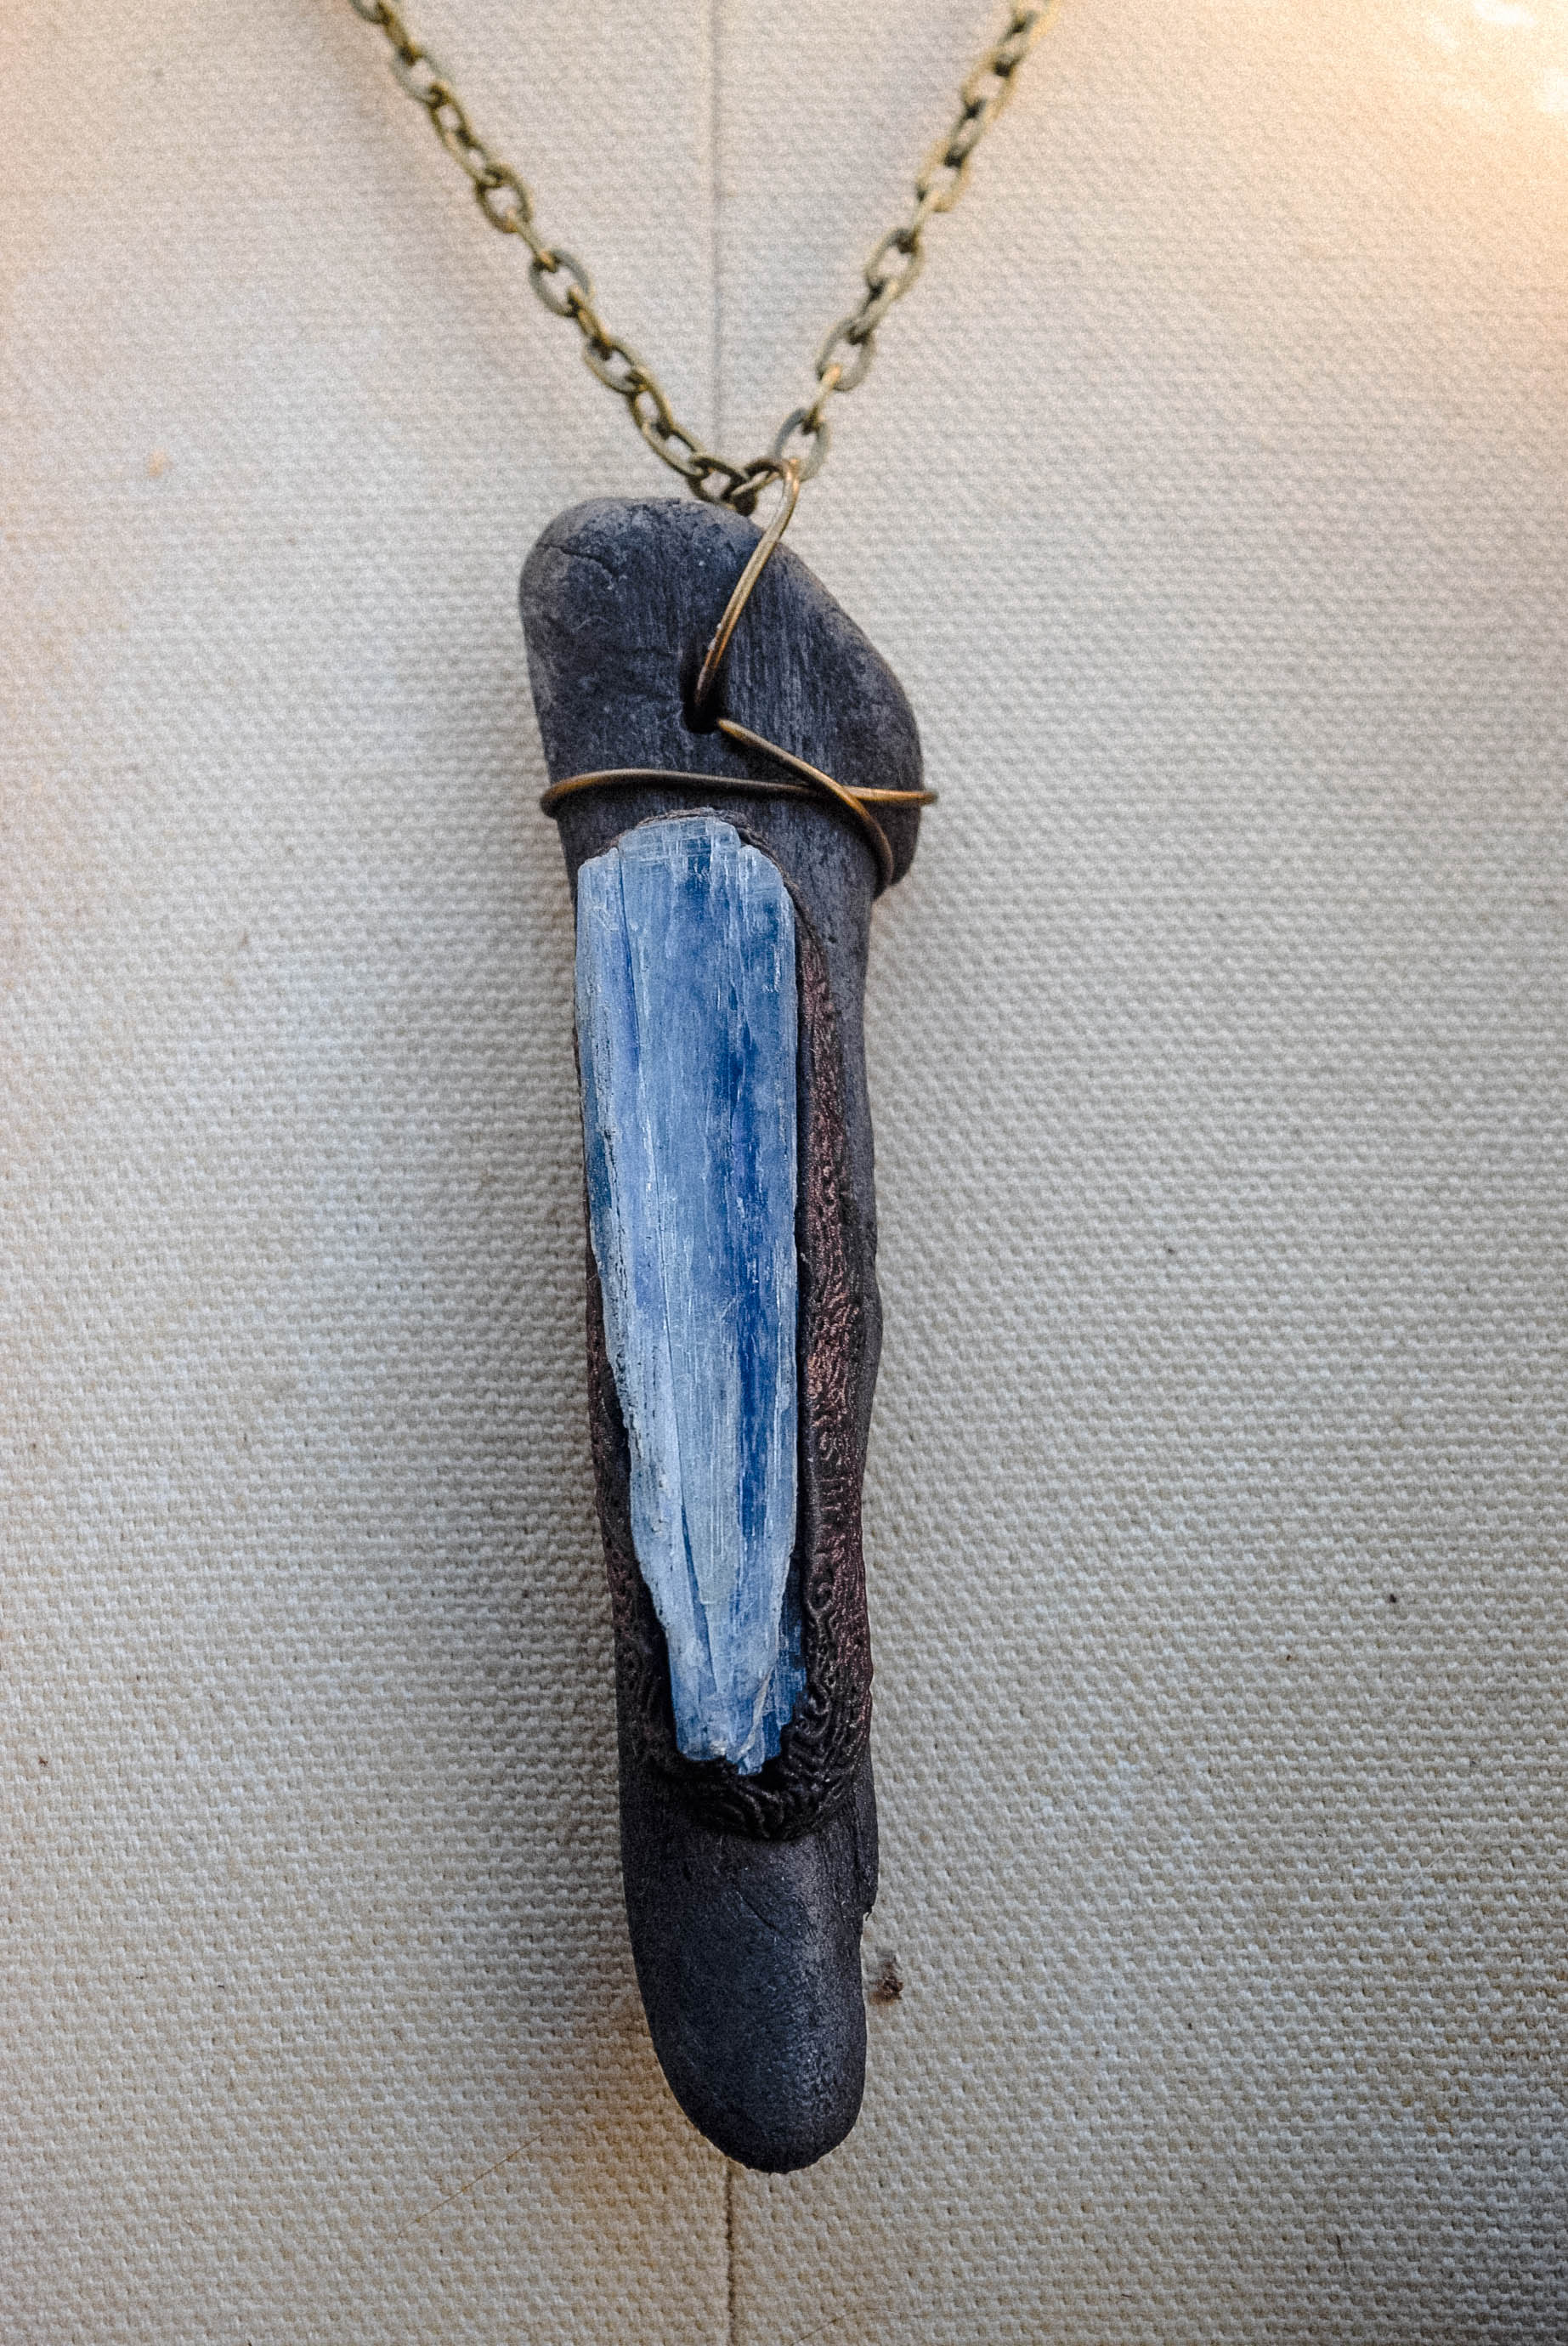 Driftwood Necklace with Blue Kyanite to Clear Fears and Blockages